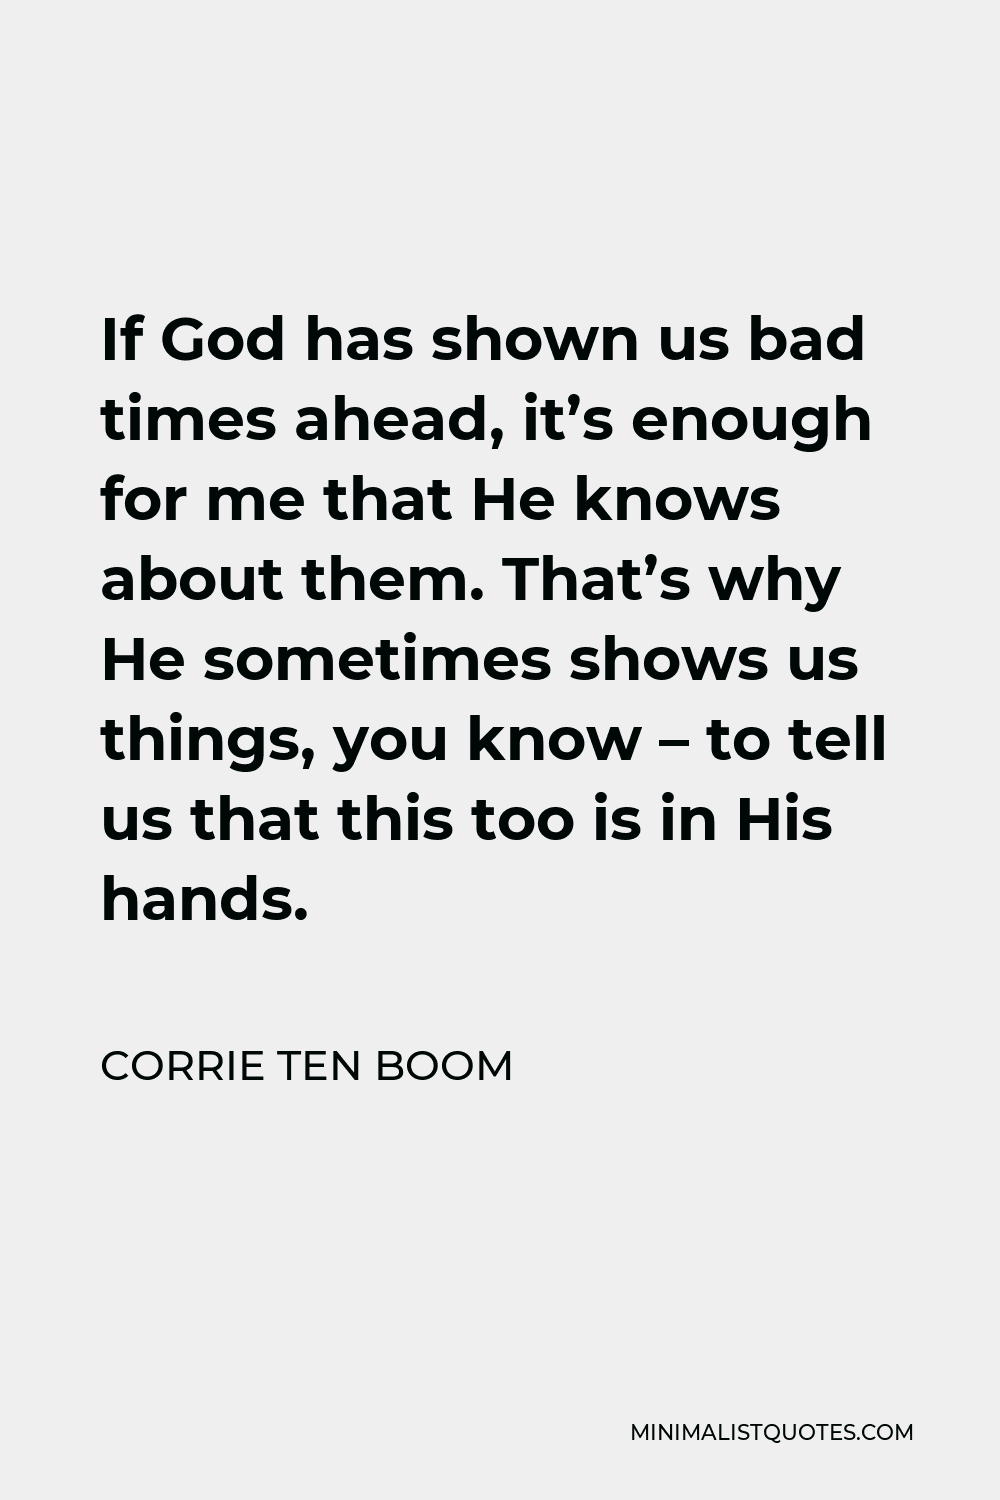 Corrie ten Boom Quote - If God has shown us bad times ahead, it’s enough for me that He knows about them. That’s why He sometimes shows us things, you know – to tell us that this too is in His hands.